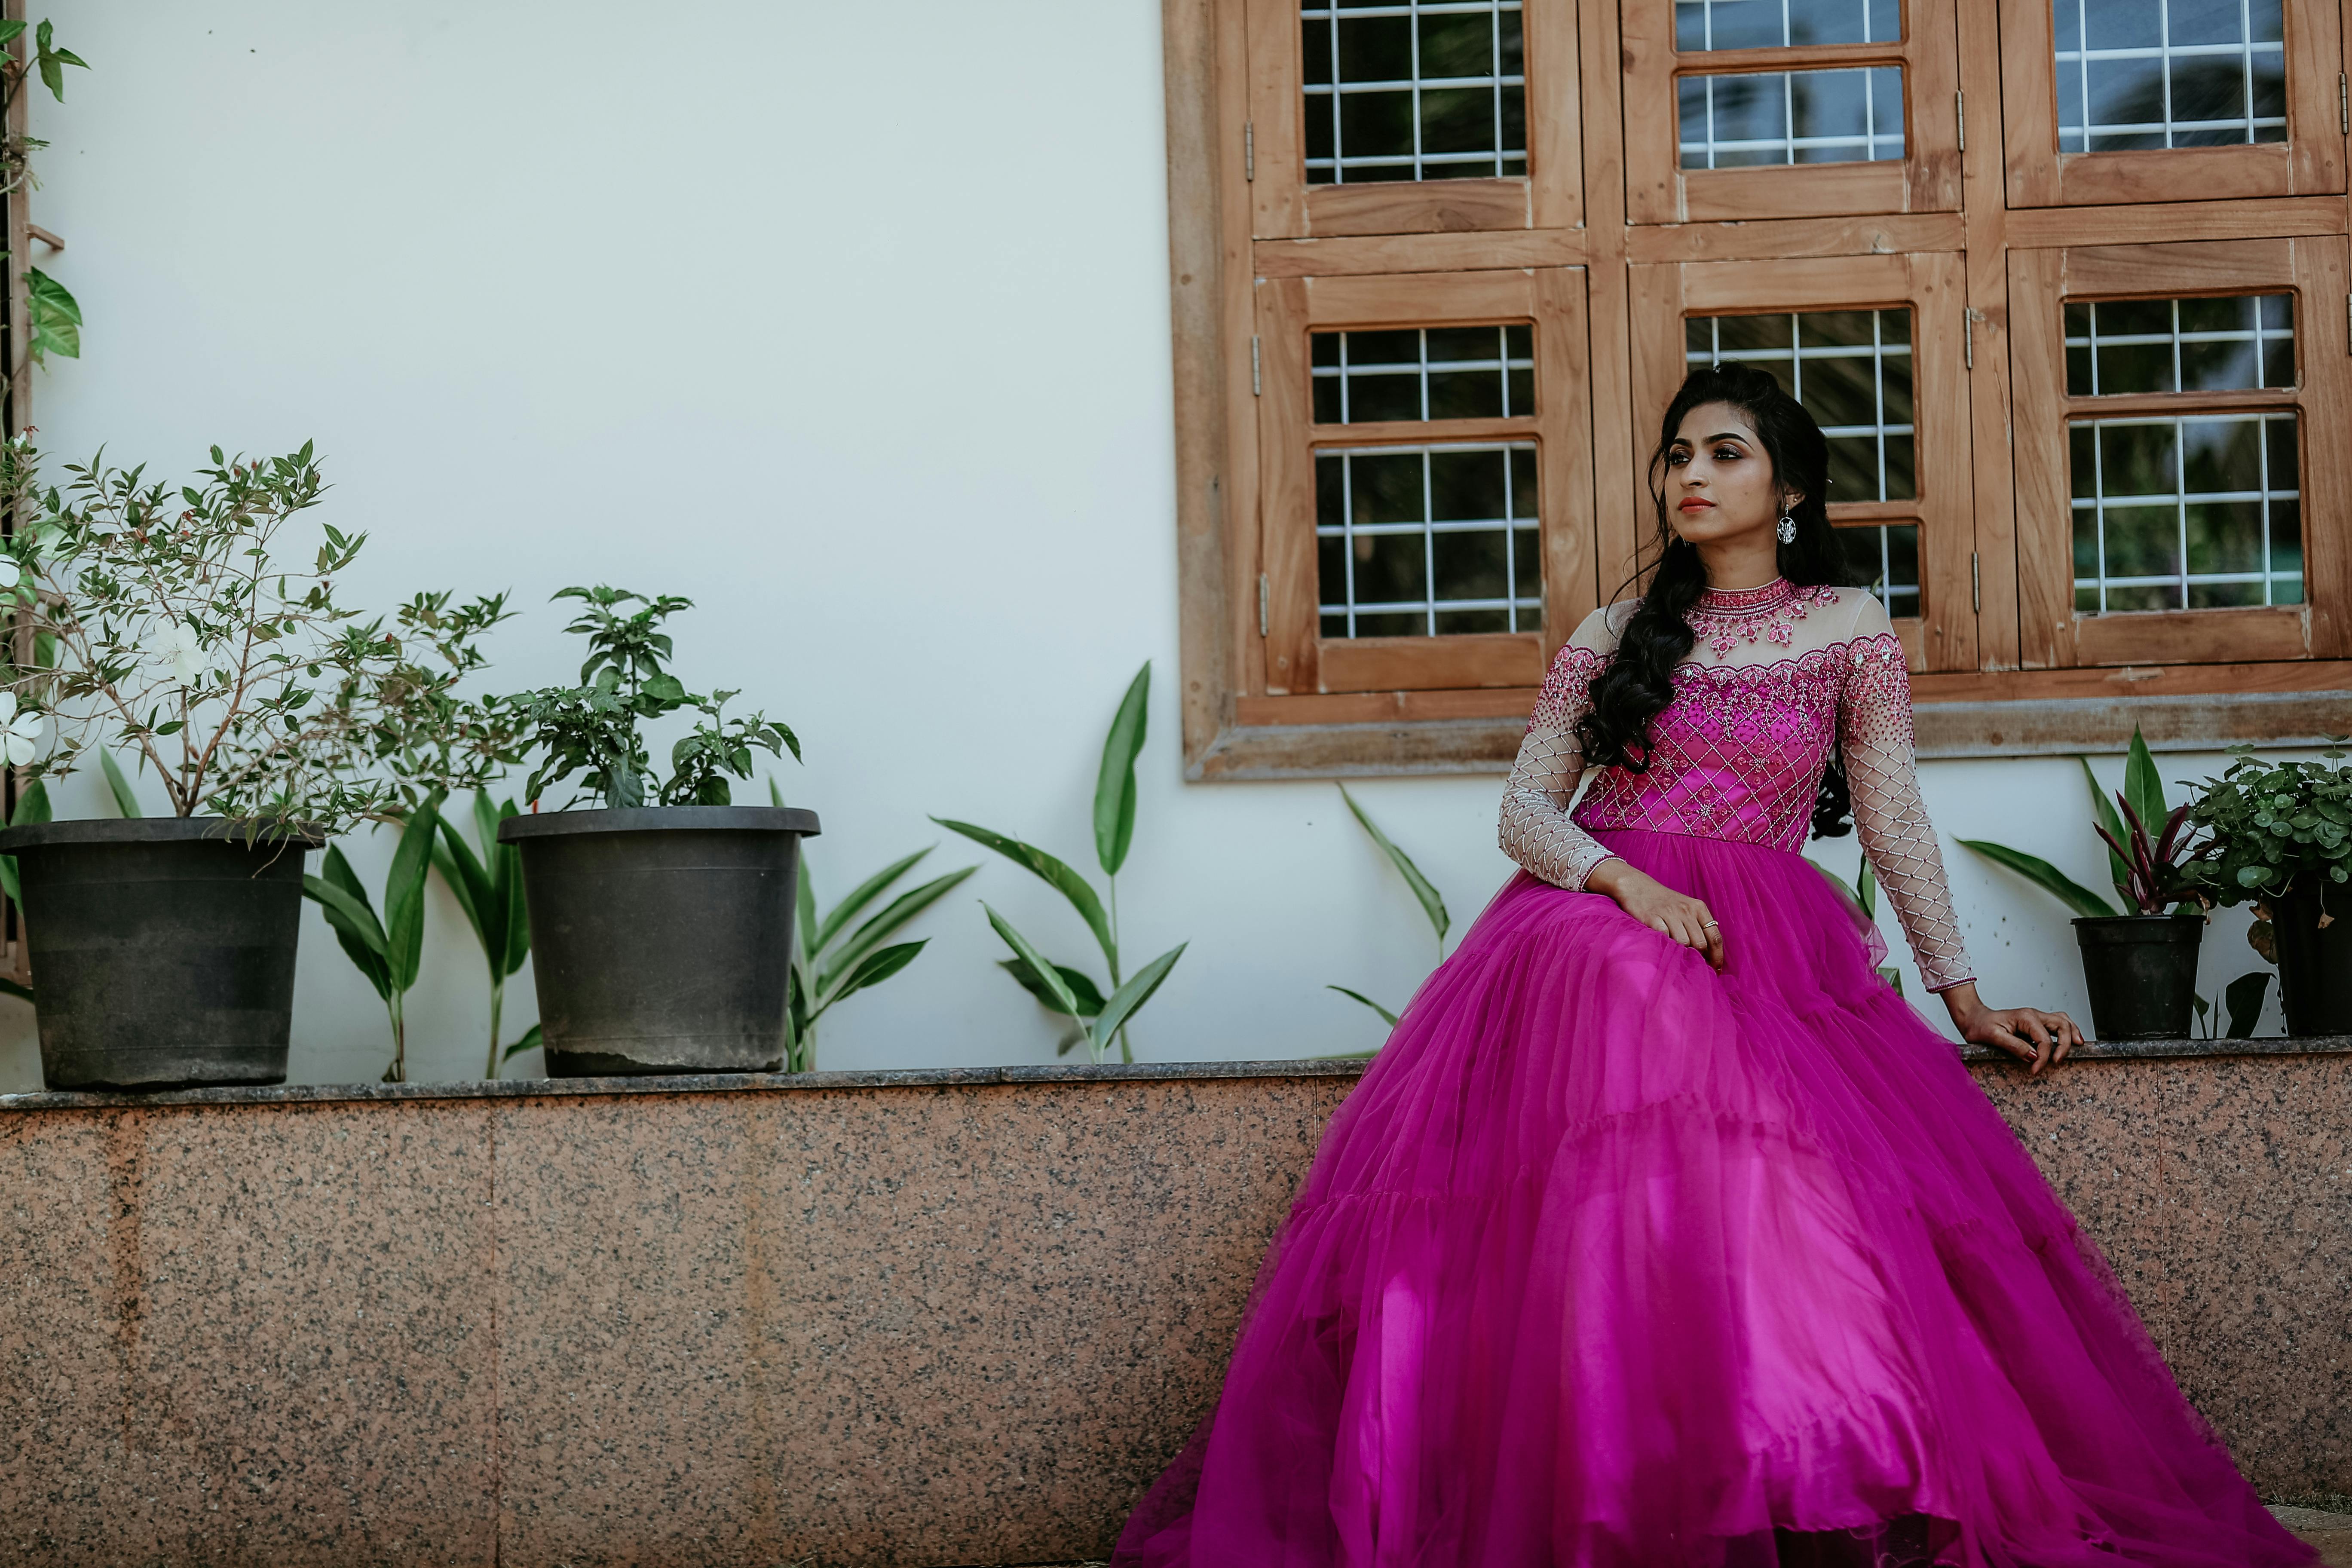 rental dresses for photography sessions: Emma tulle gown (TEEN-ADULT)